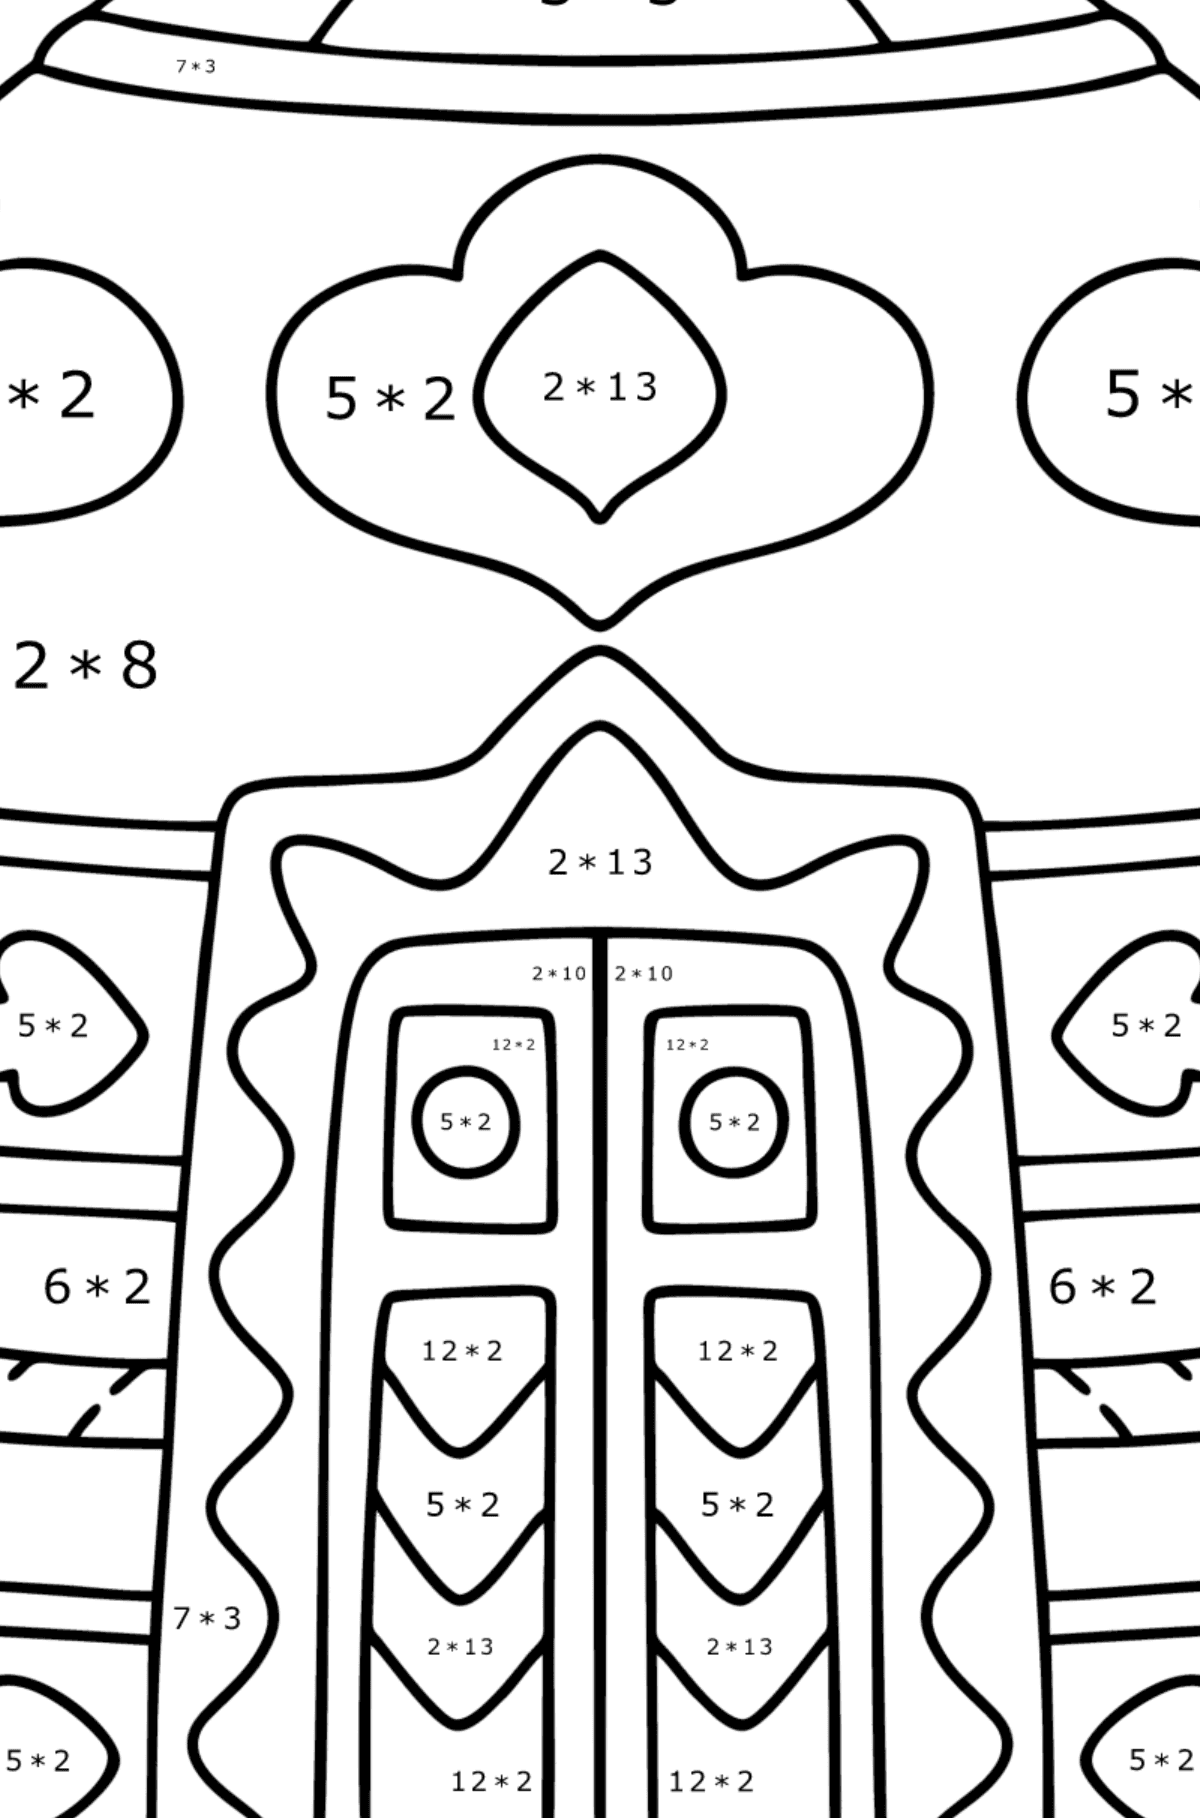 Yurt of nomad coloring page - Math Coloring - Multiplication for Kids